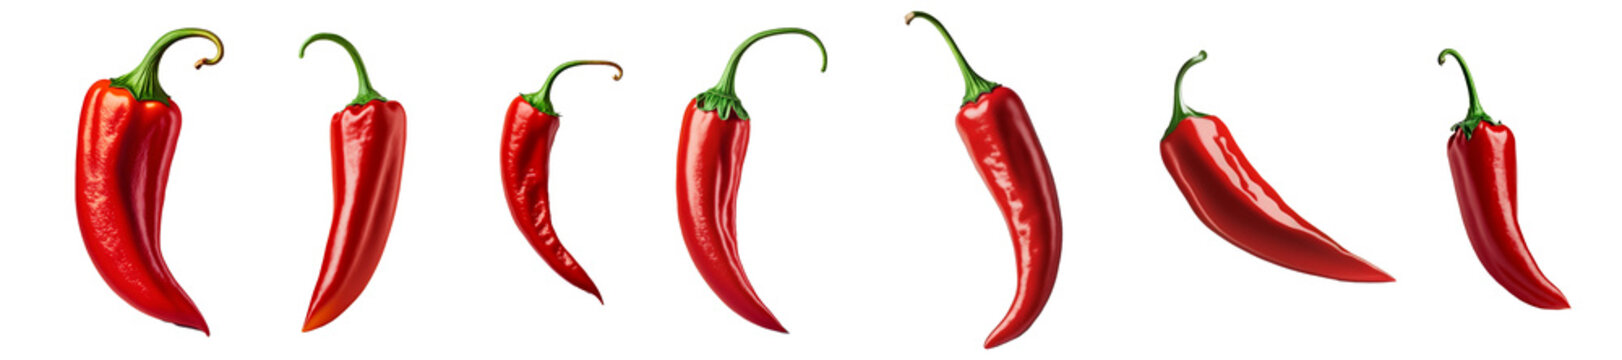 Set of red chilis pepper isolated on transparent background